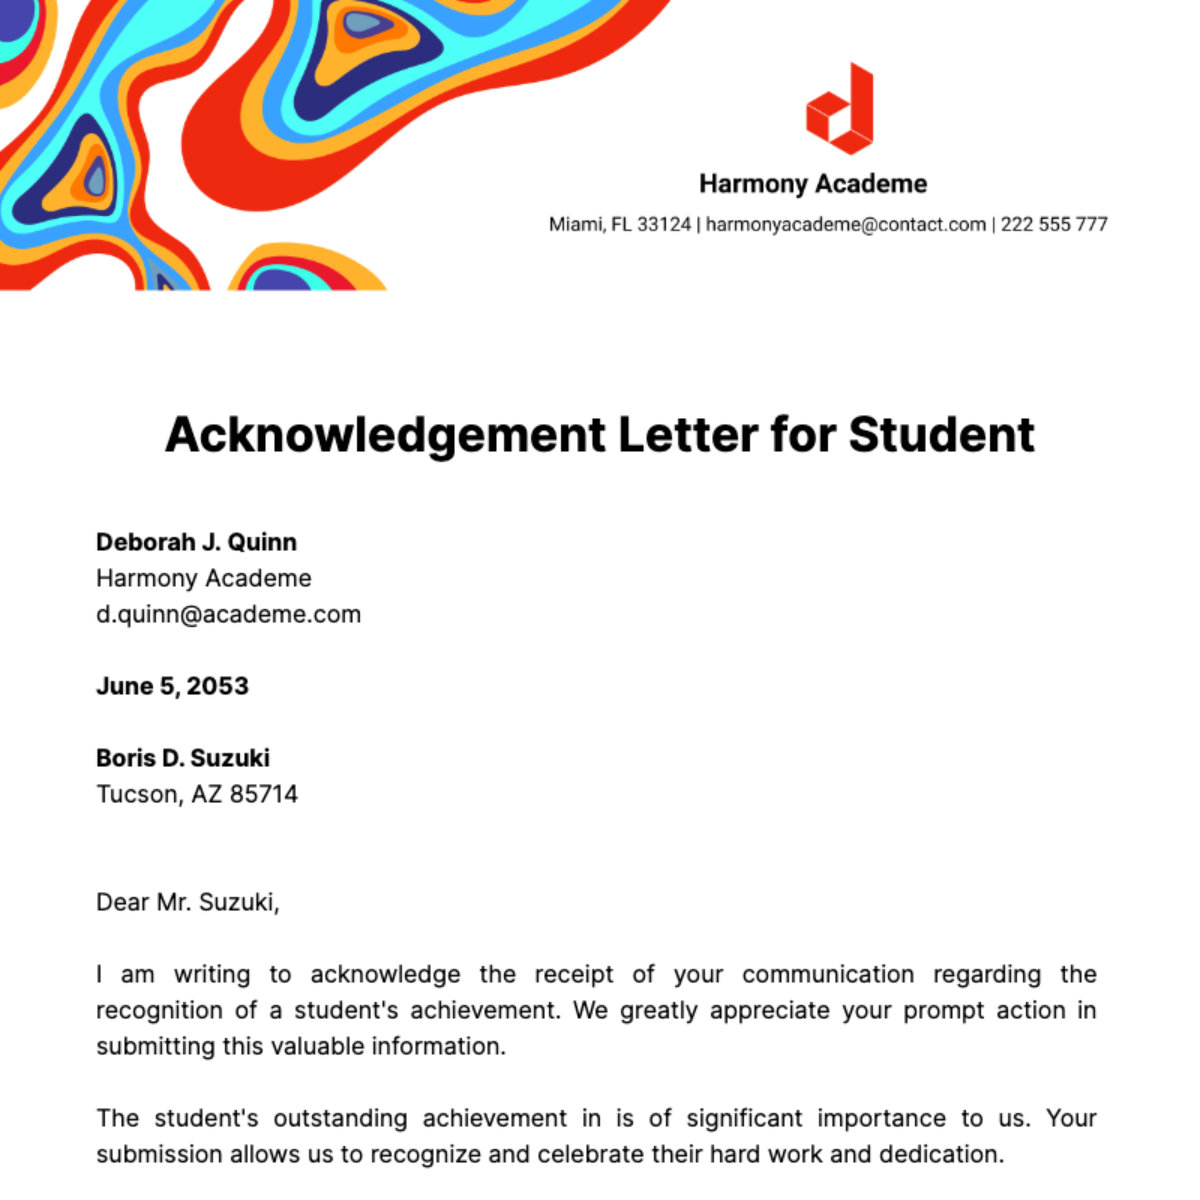 Acknowledgement Letter for Student Template